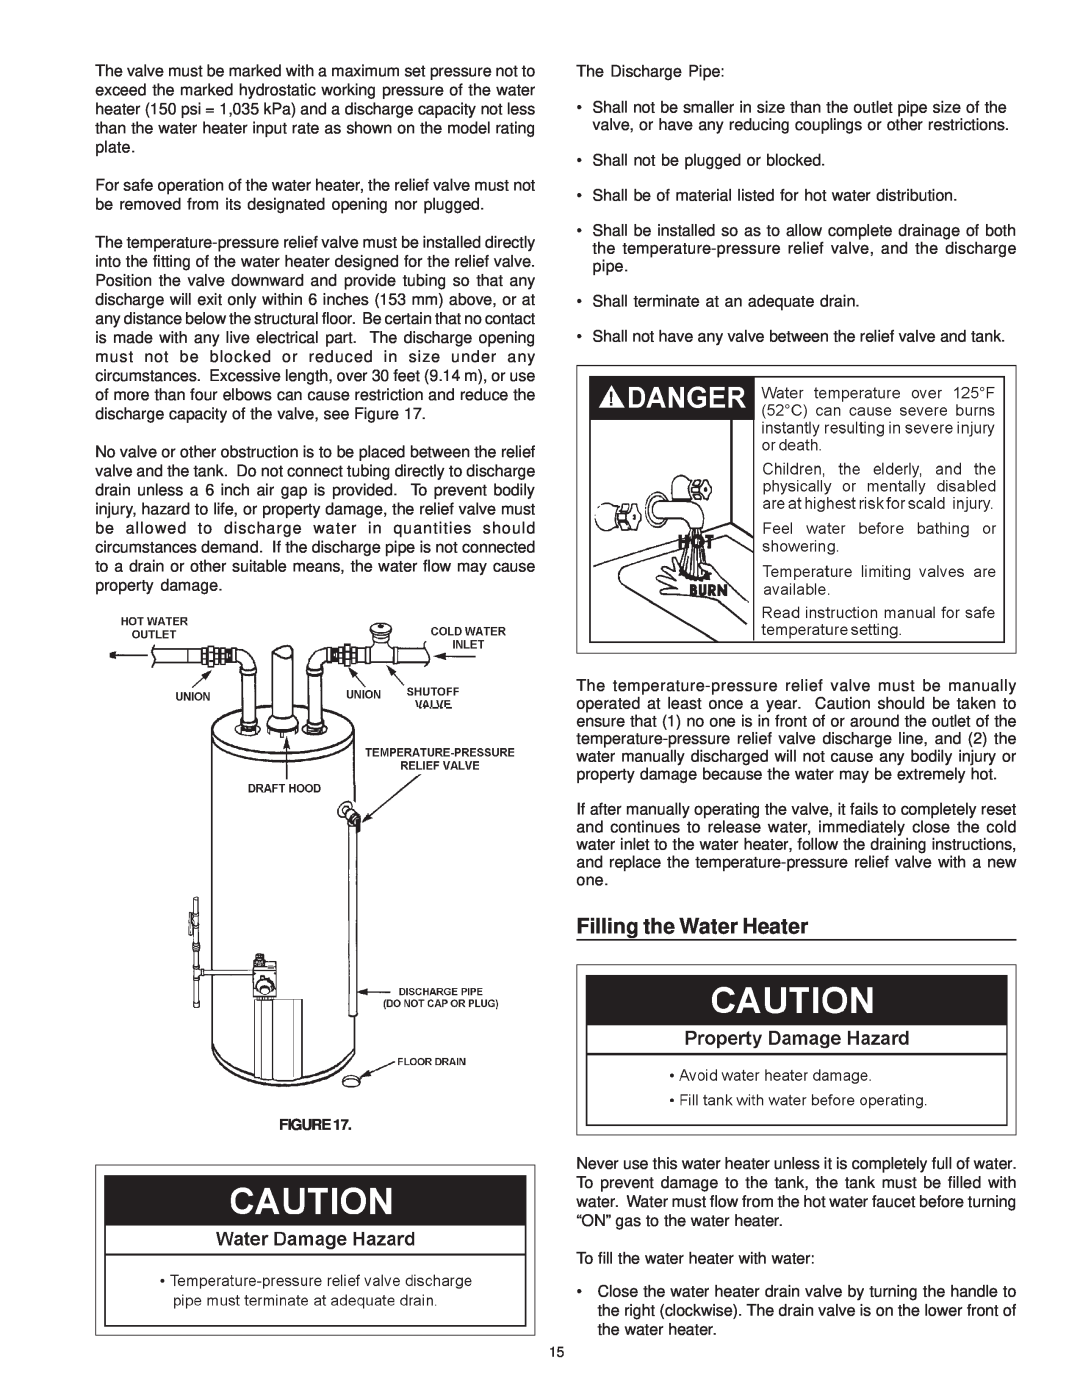 Maytag C3 manual Filling the Water Heater 